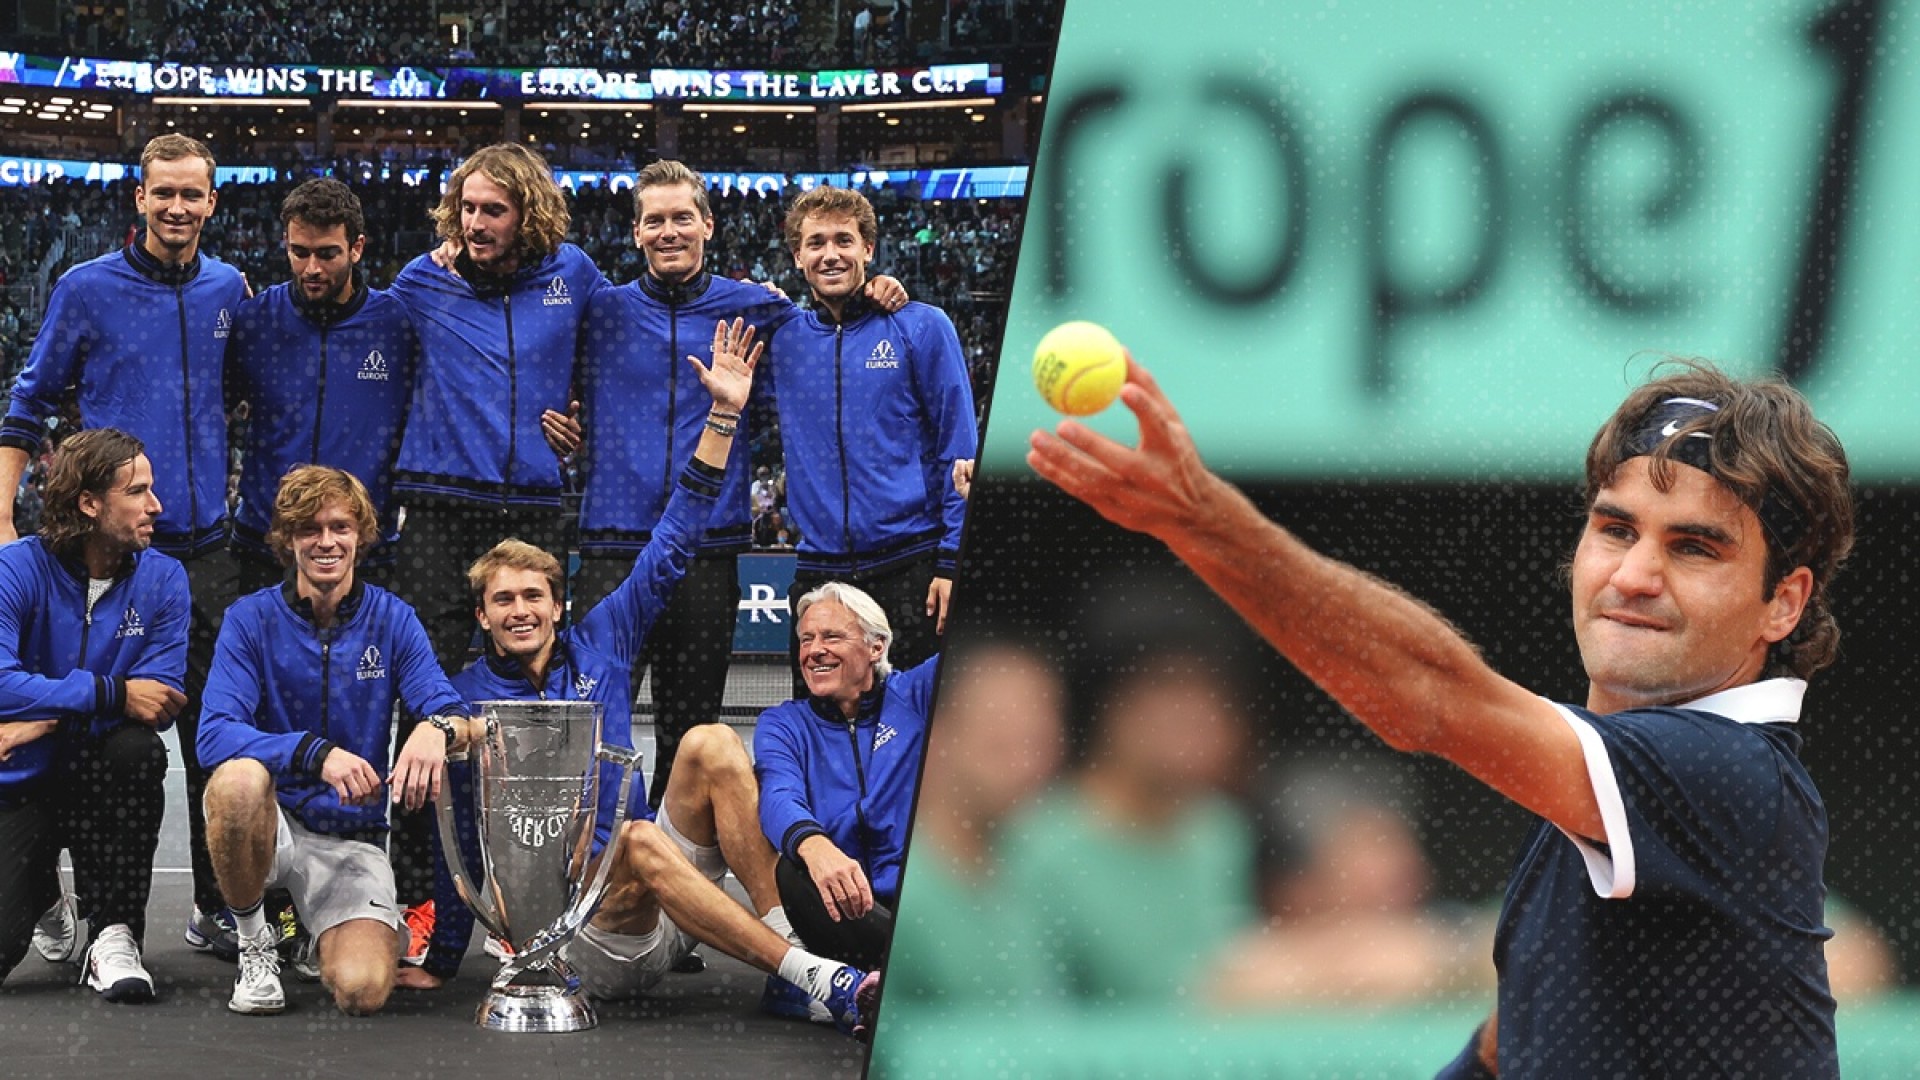 Everything to Know About the Laver Cup, Roger Federers Final Tournament